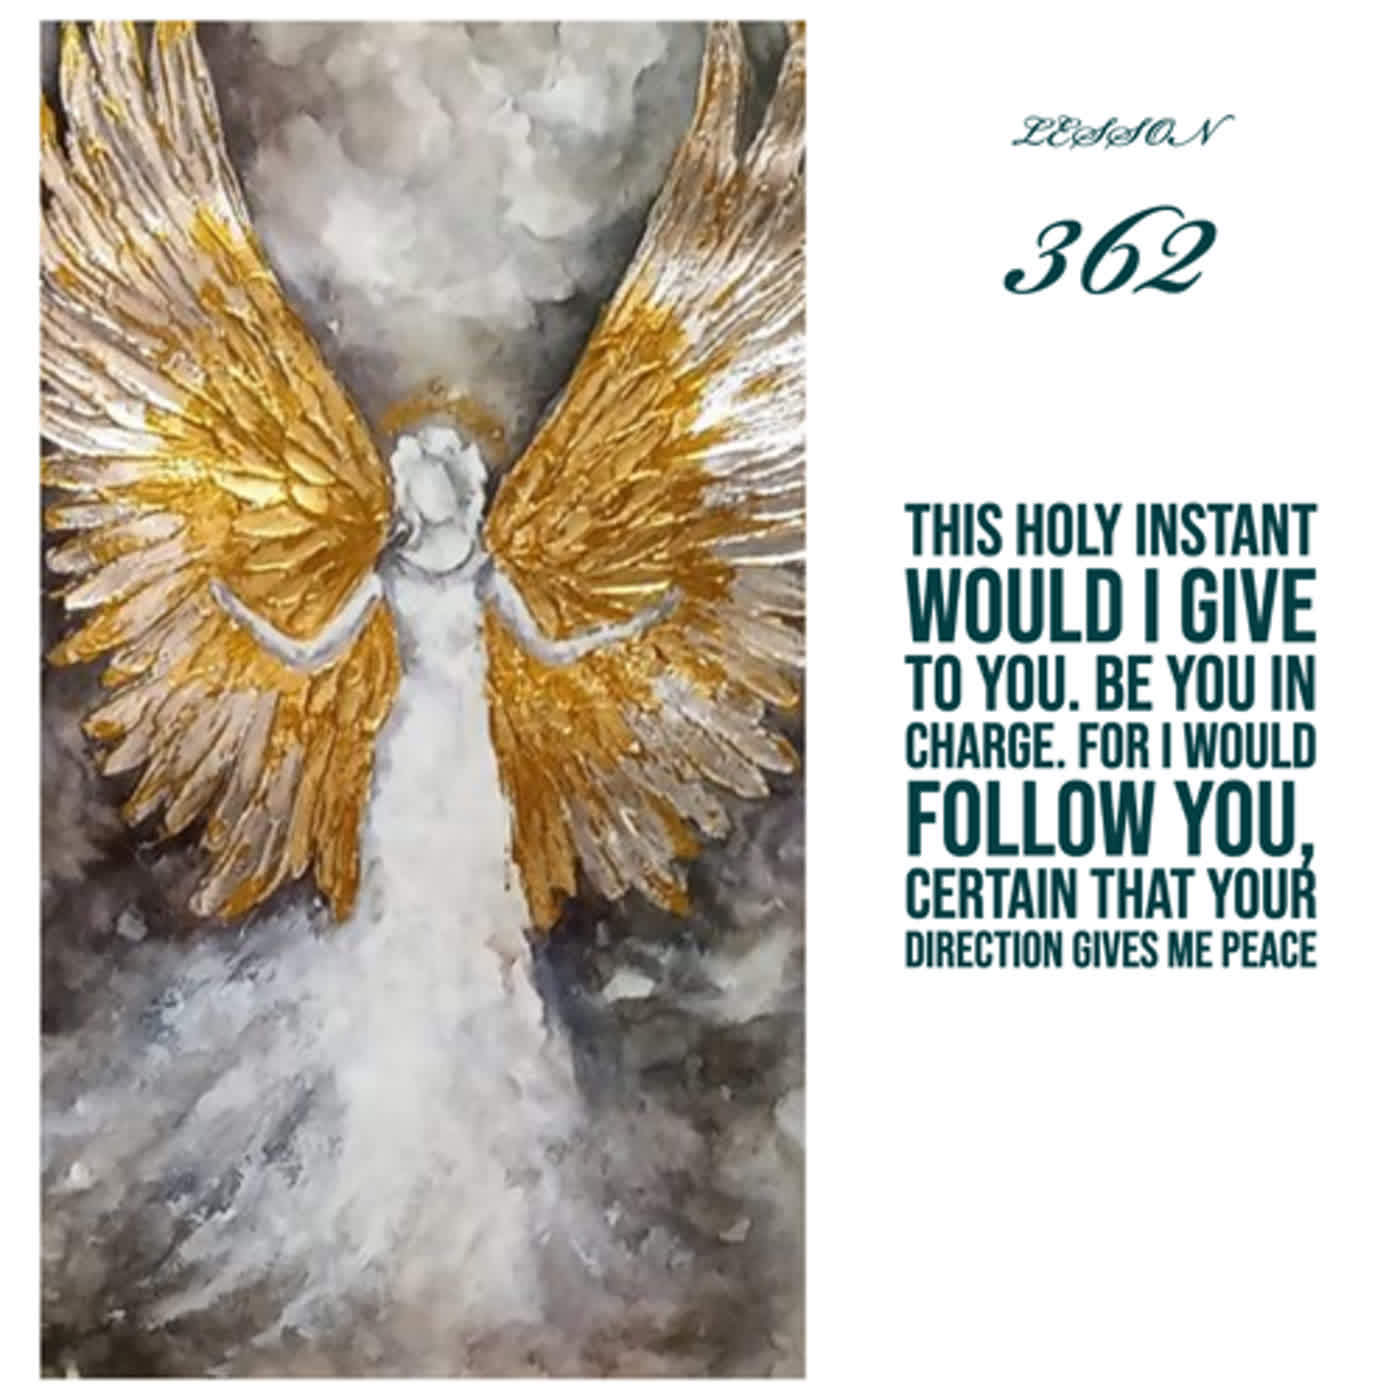 Lessons 362 This holy instant would I give to You. Be You in charge. For I would follow You, certain that Your direction gives me peace